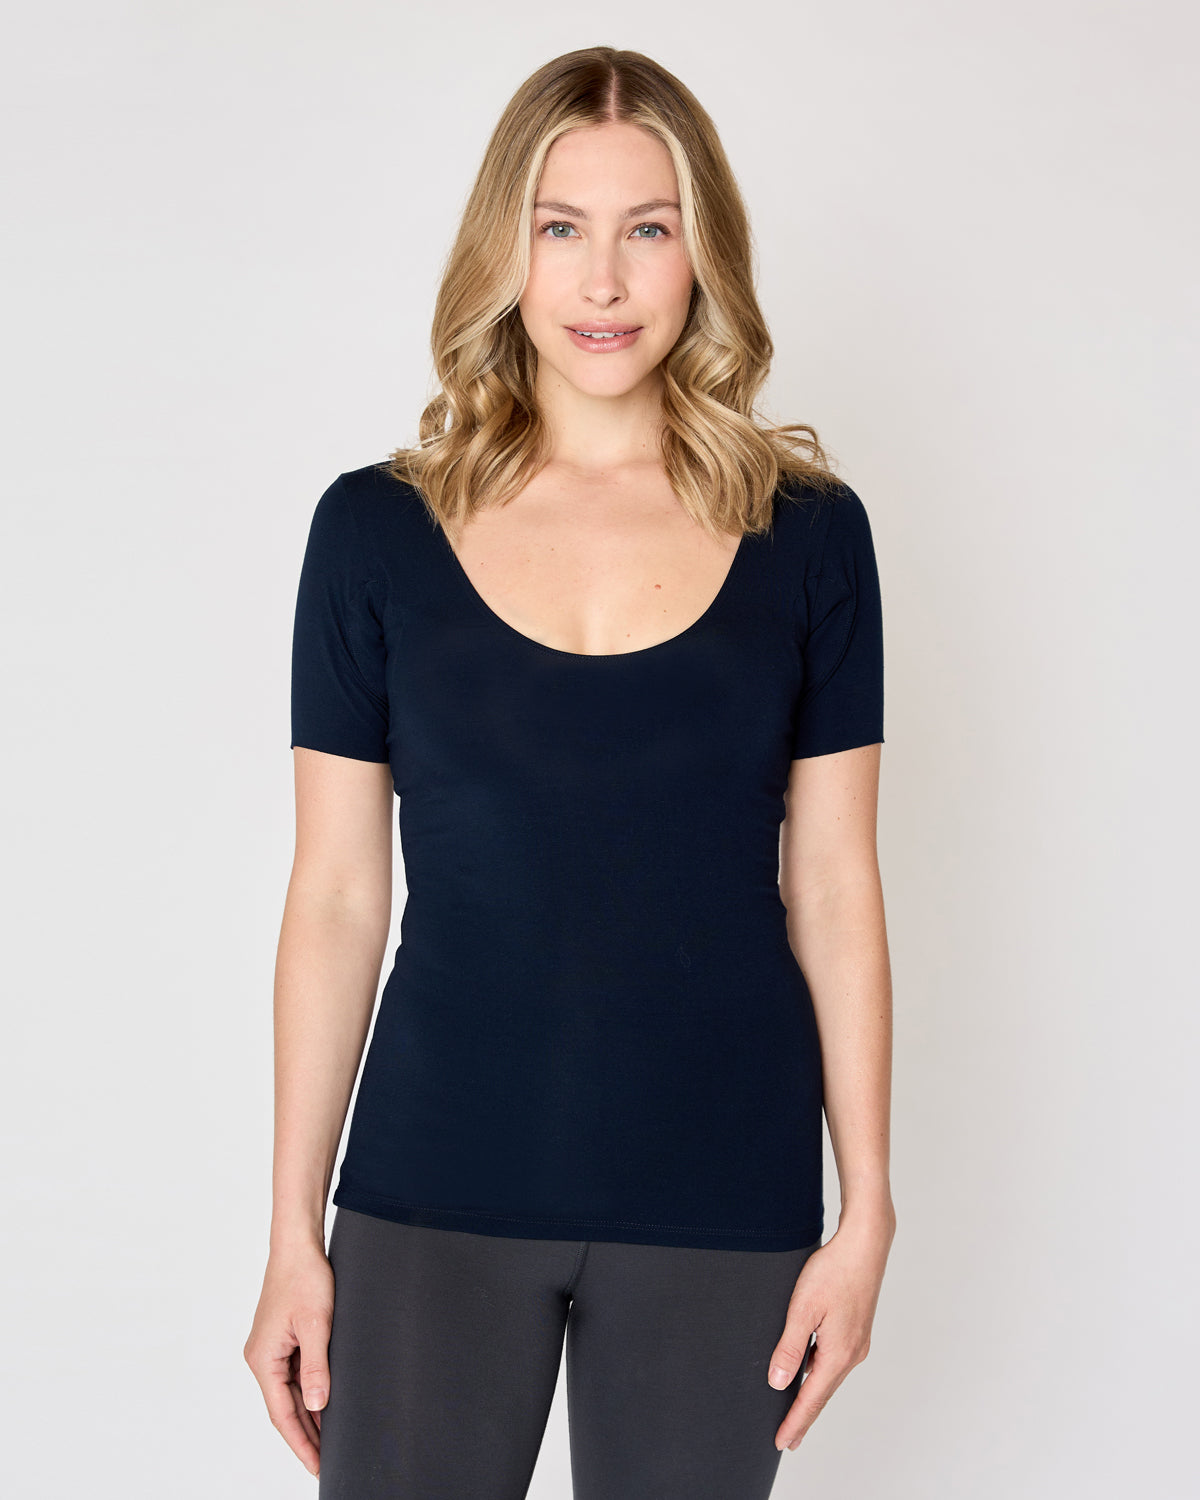 "#color_NAVY | Alex is 5'7" and was wears a size small